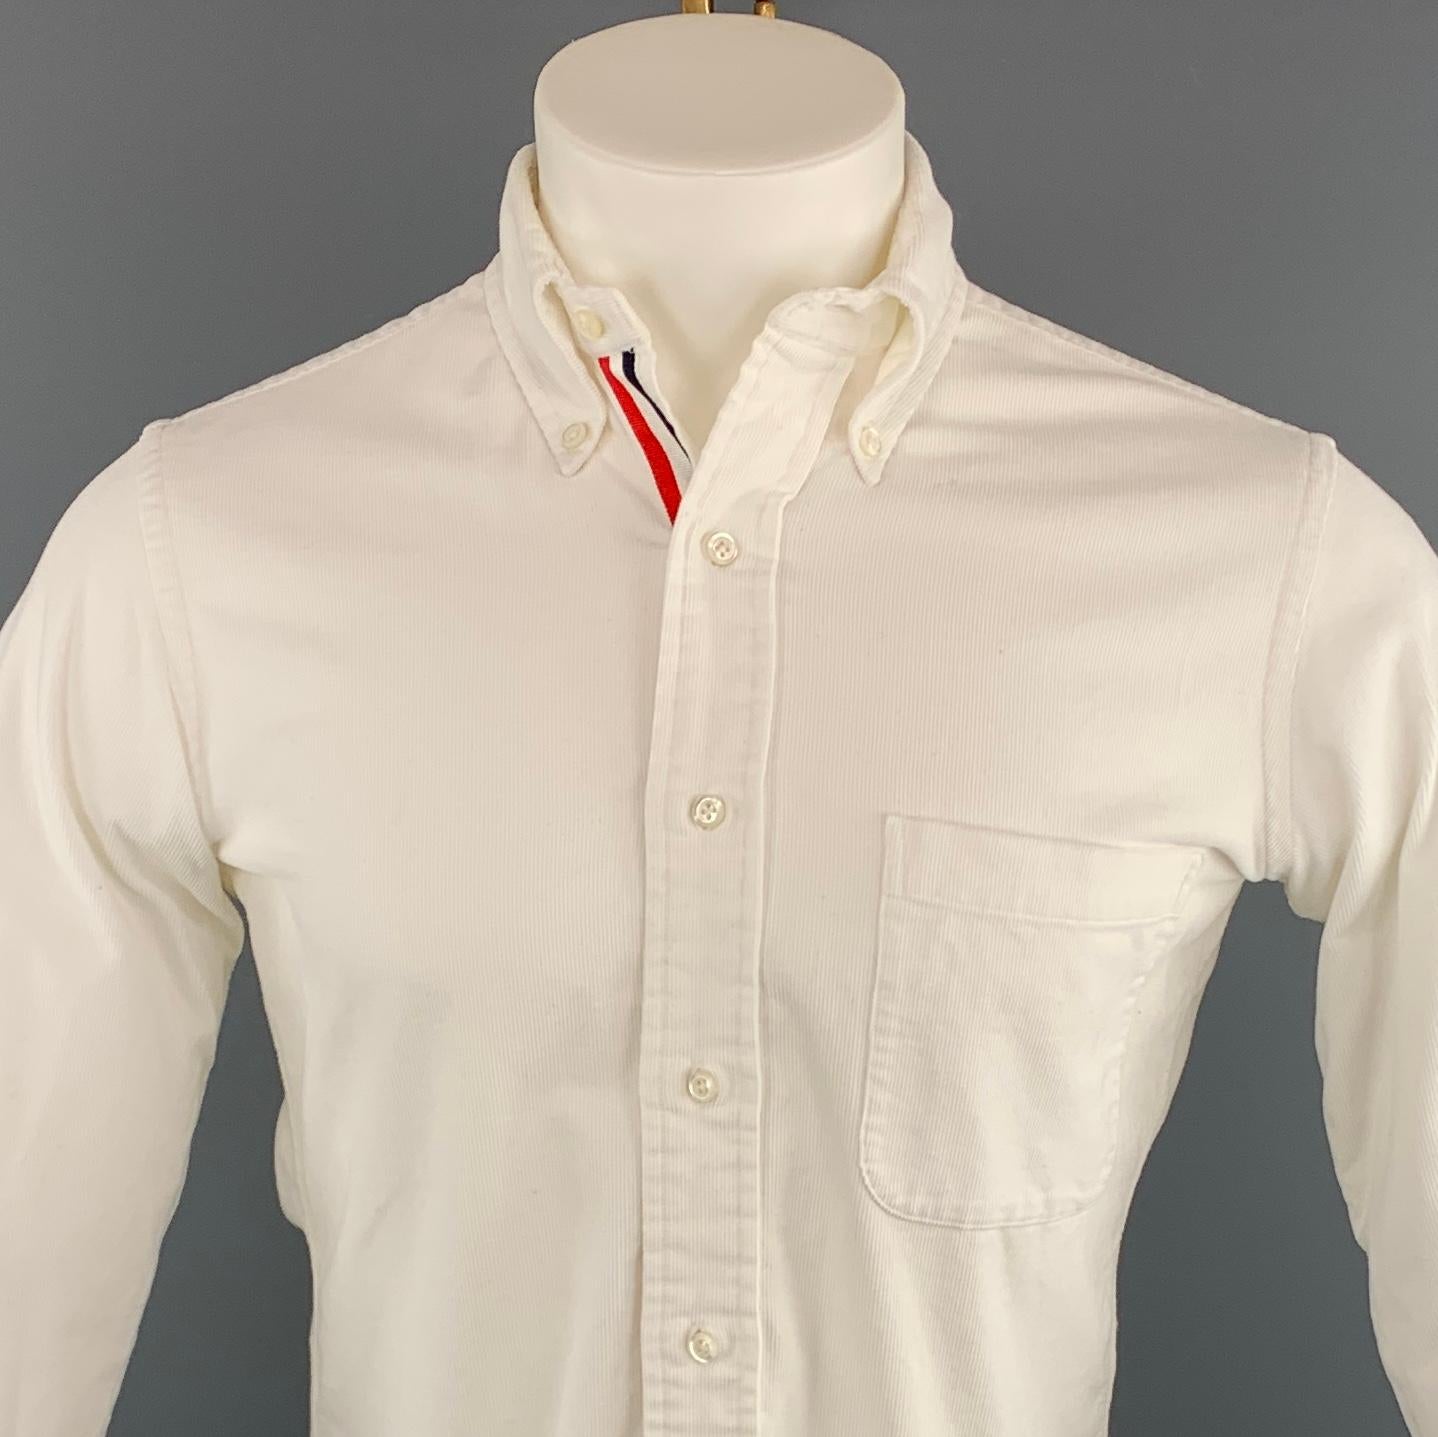 THOM BROWNE Long Sleeve Shirt comes in a white corduroy featuring a button down style and a front patch pocket. Made in USA. 

Excellent Pre-Owned Condition.
Marked: 1

Measurements:

Shoulder: 15 in.
Chest: 38 in. 
Sleeve: 24.5 in. 
Length: 29 in. 